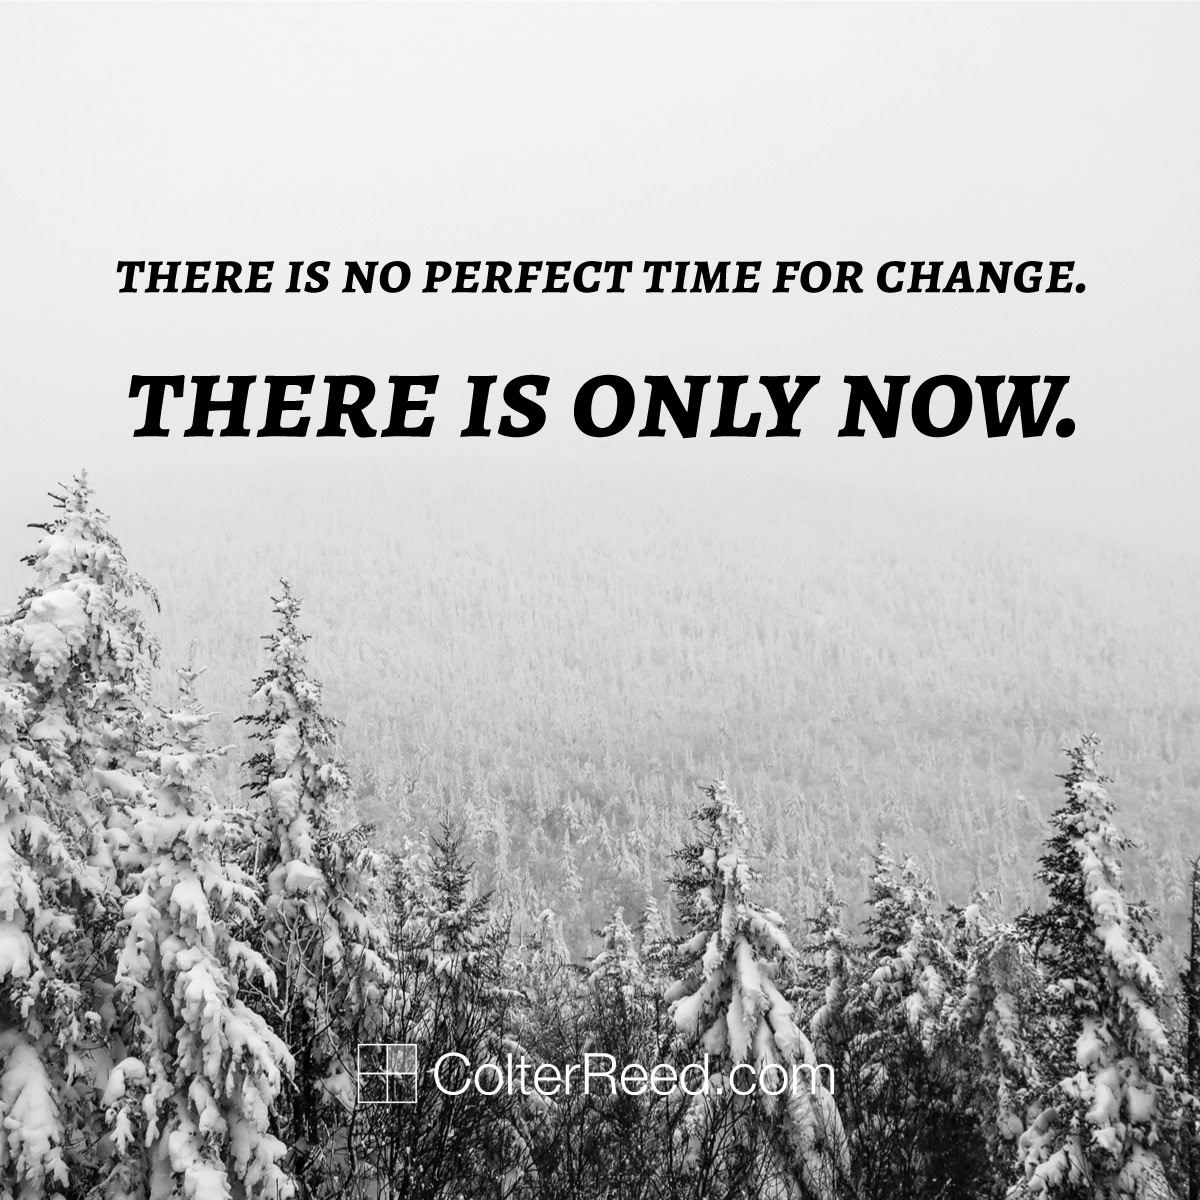 There is no perfect time for change. There is only now. —Colter Reed